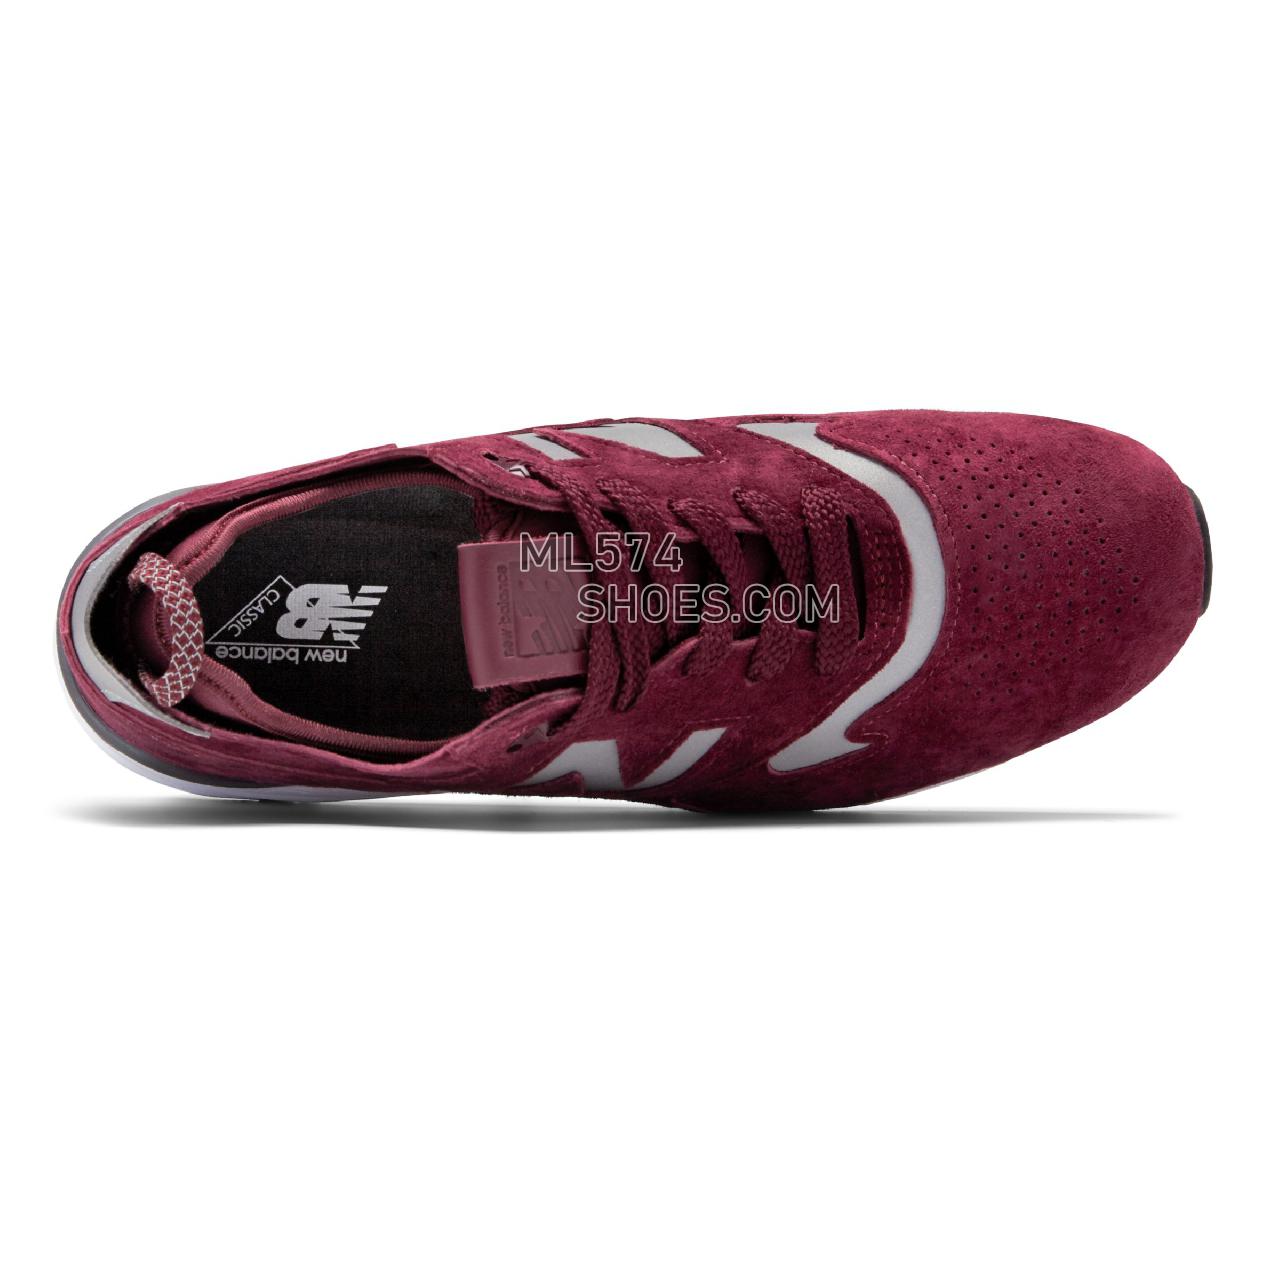 New Balance 999 Made in US - Men's 999 - Classic Burgundy with White - M999RTG